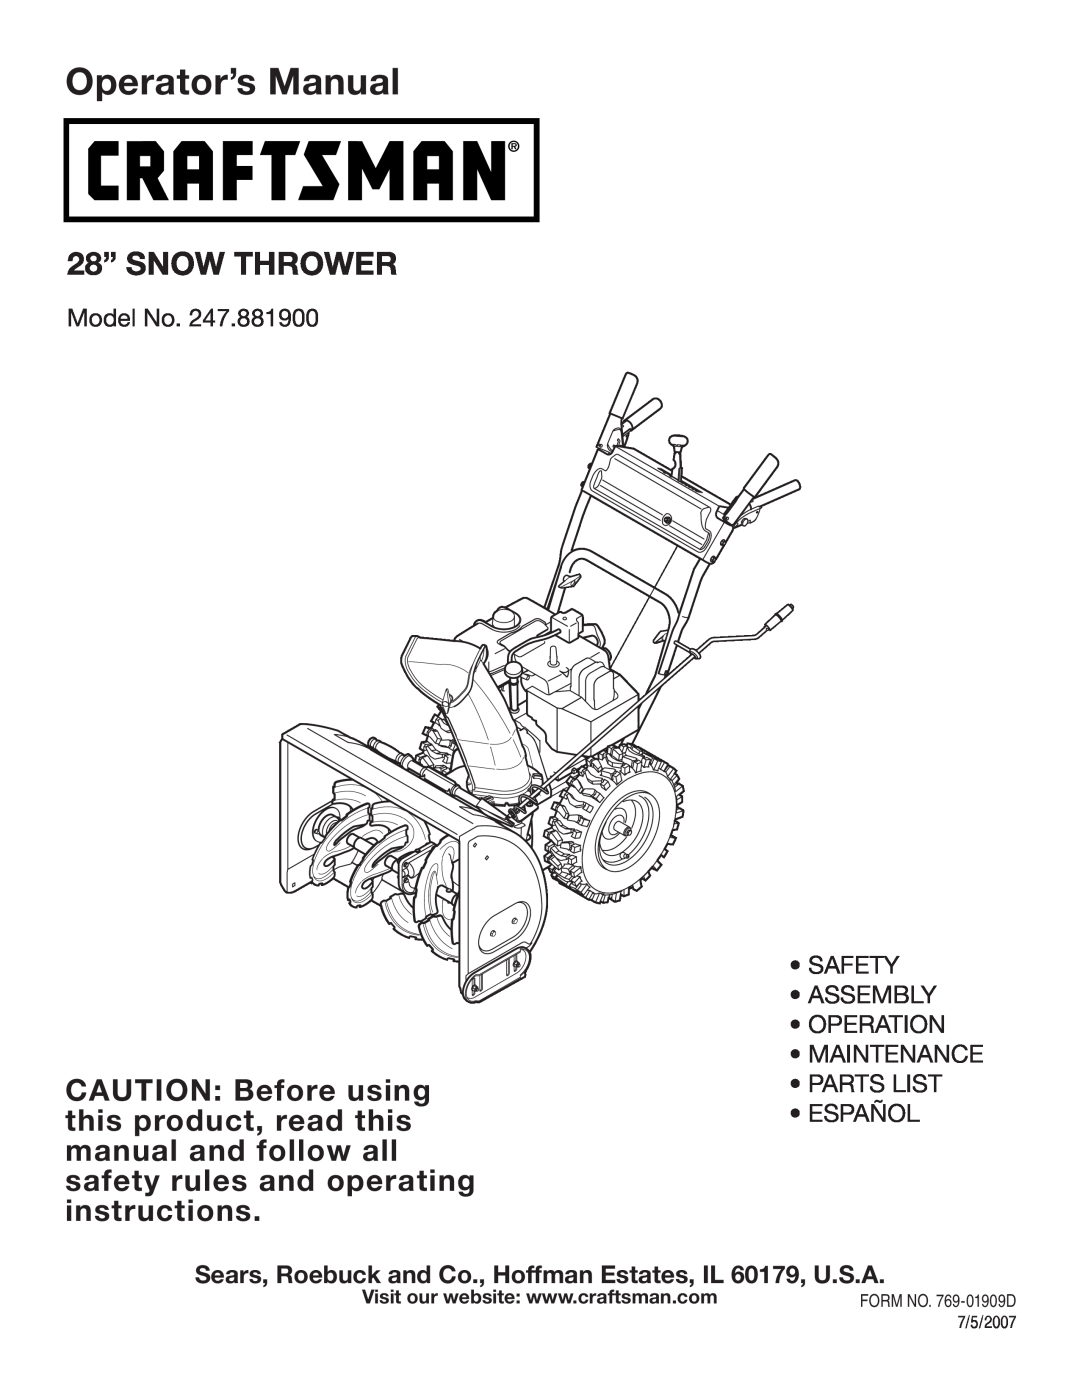 Craftsman 247.8819 operating instructions Operator’s Manual, 28” SNOW THROWER 